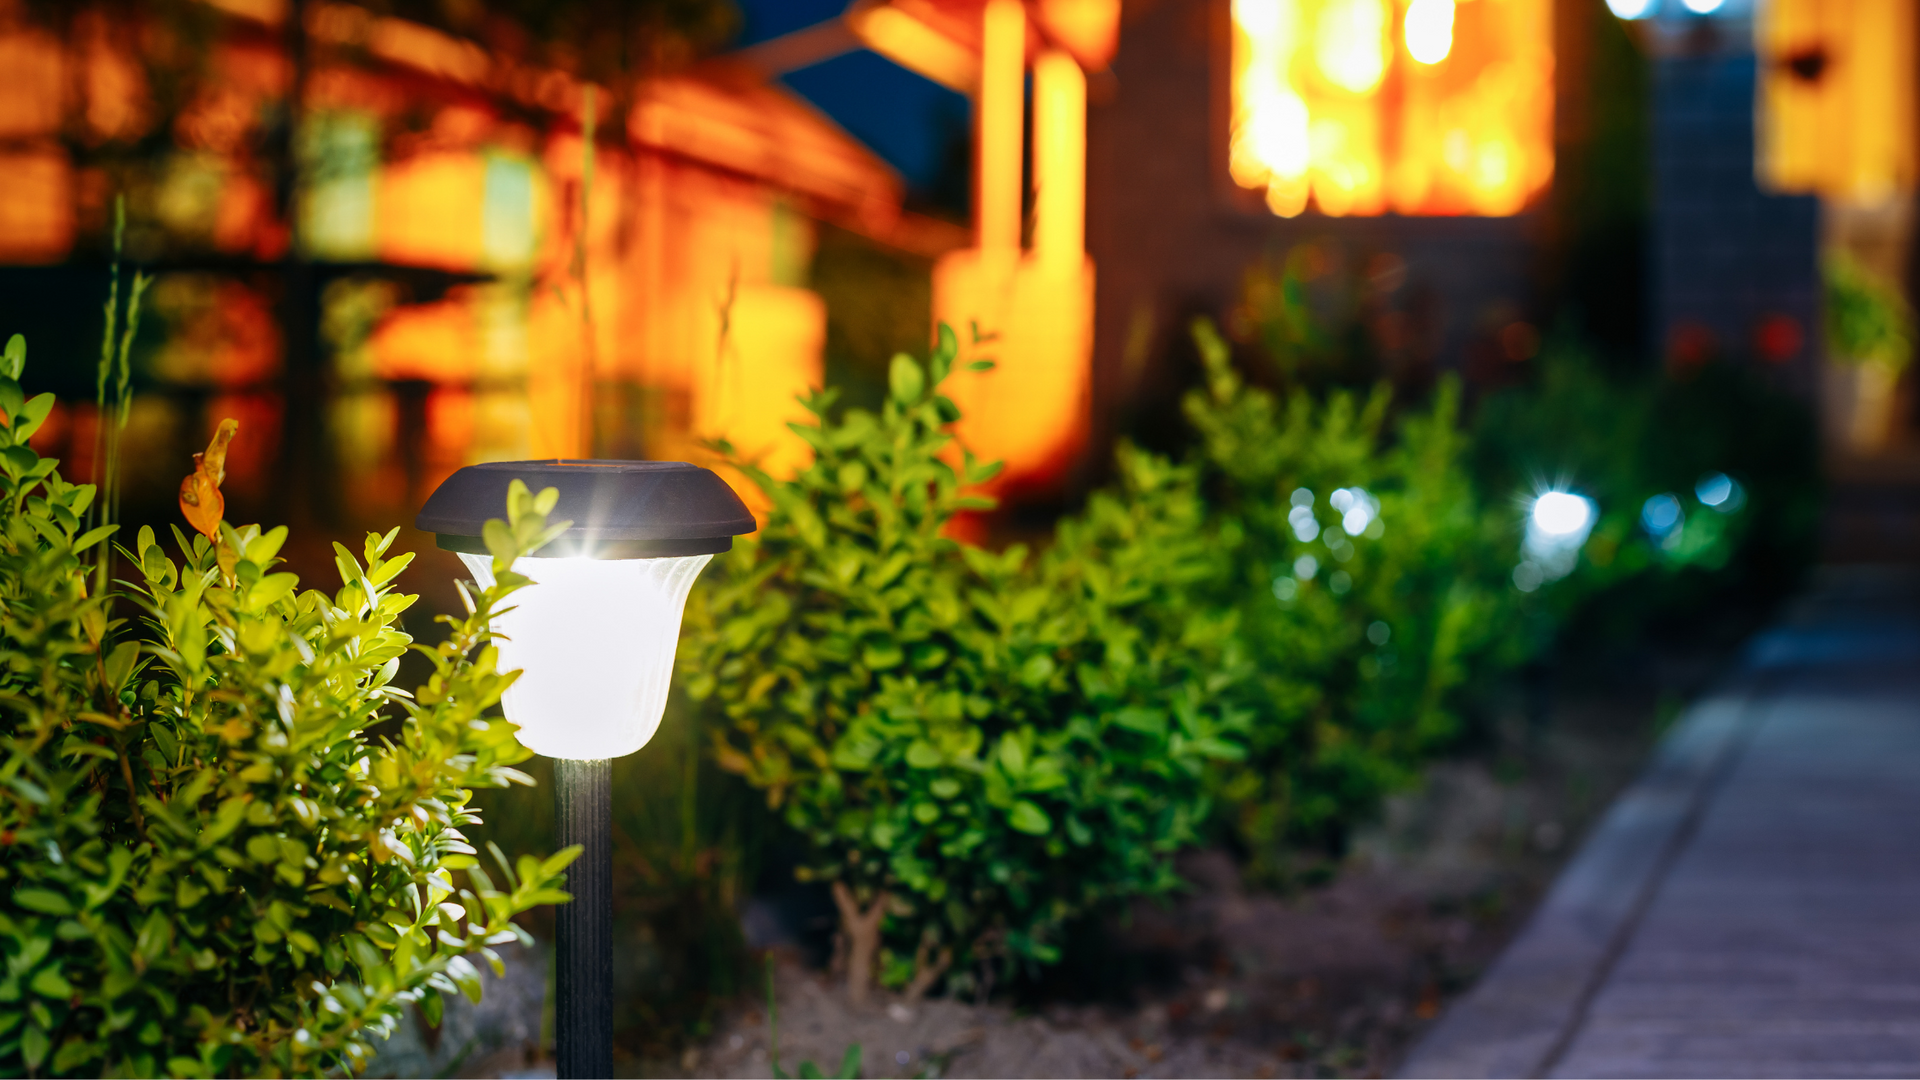 outdoor solar lights illuminating a sidewalk in front of a house, providing eco-friendly and efficient outdoor lighting.